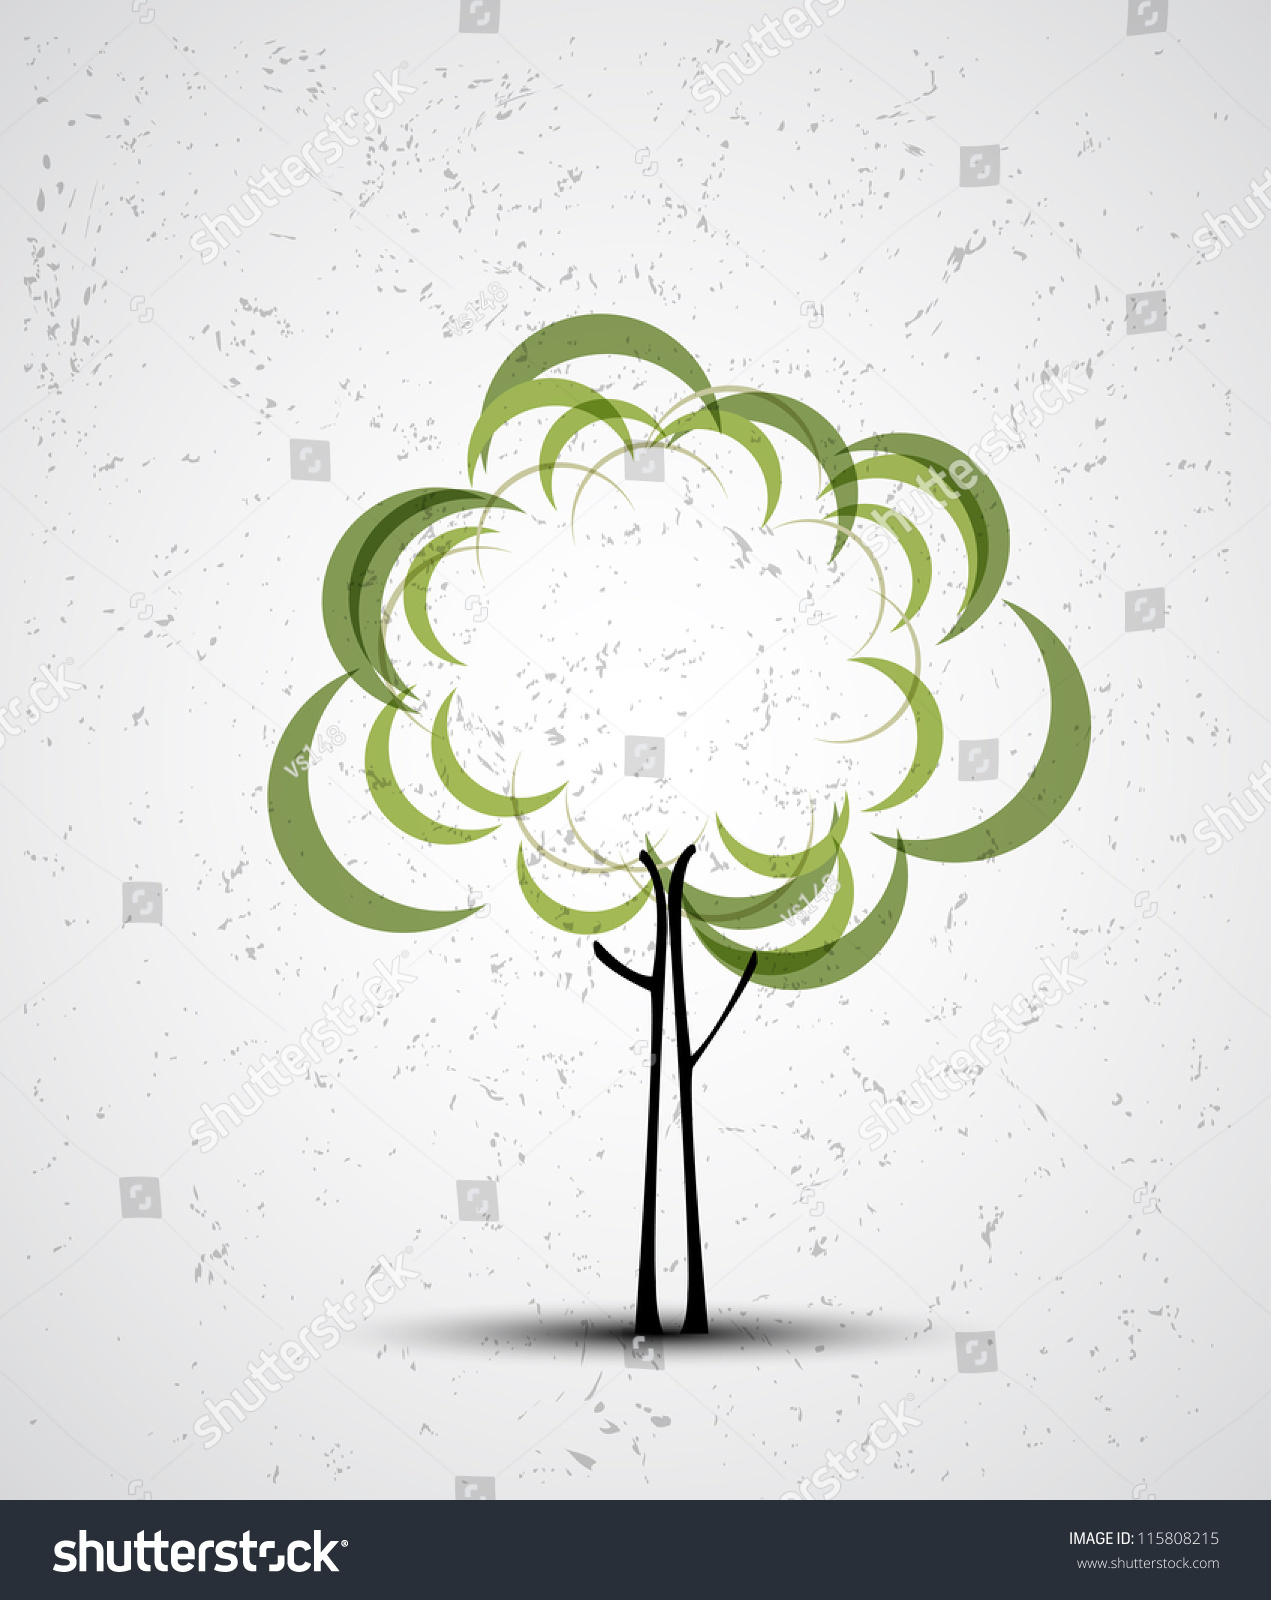 Abstract Futuristic Stylized Tree With Color Leafage Stock Vector